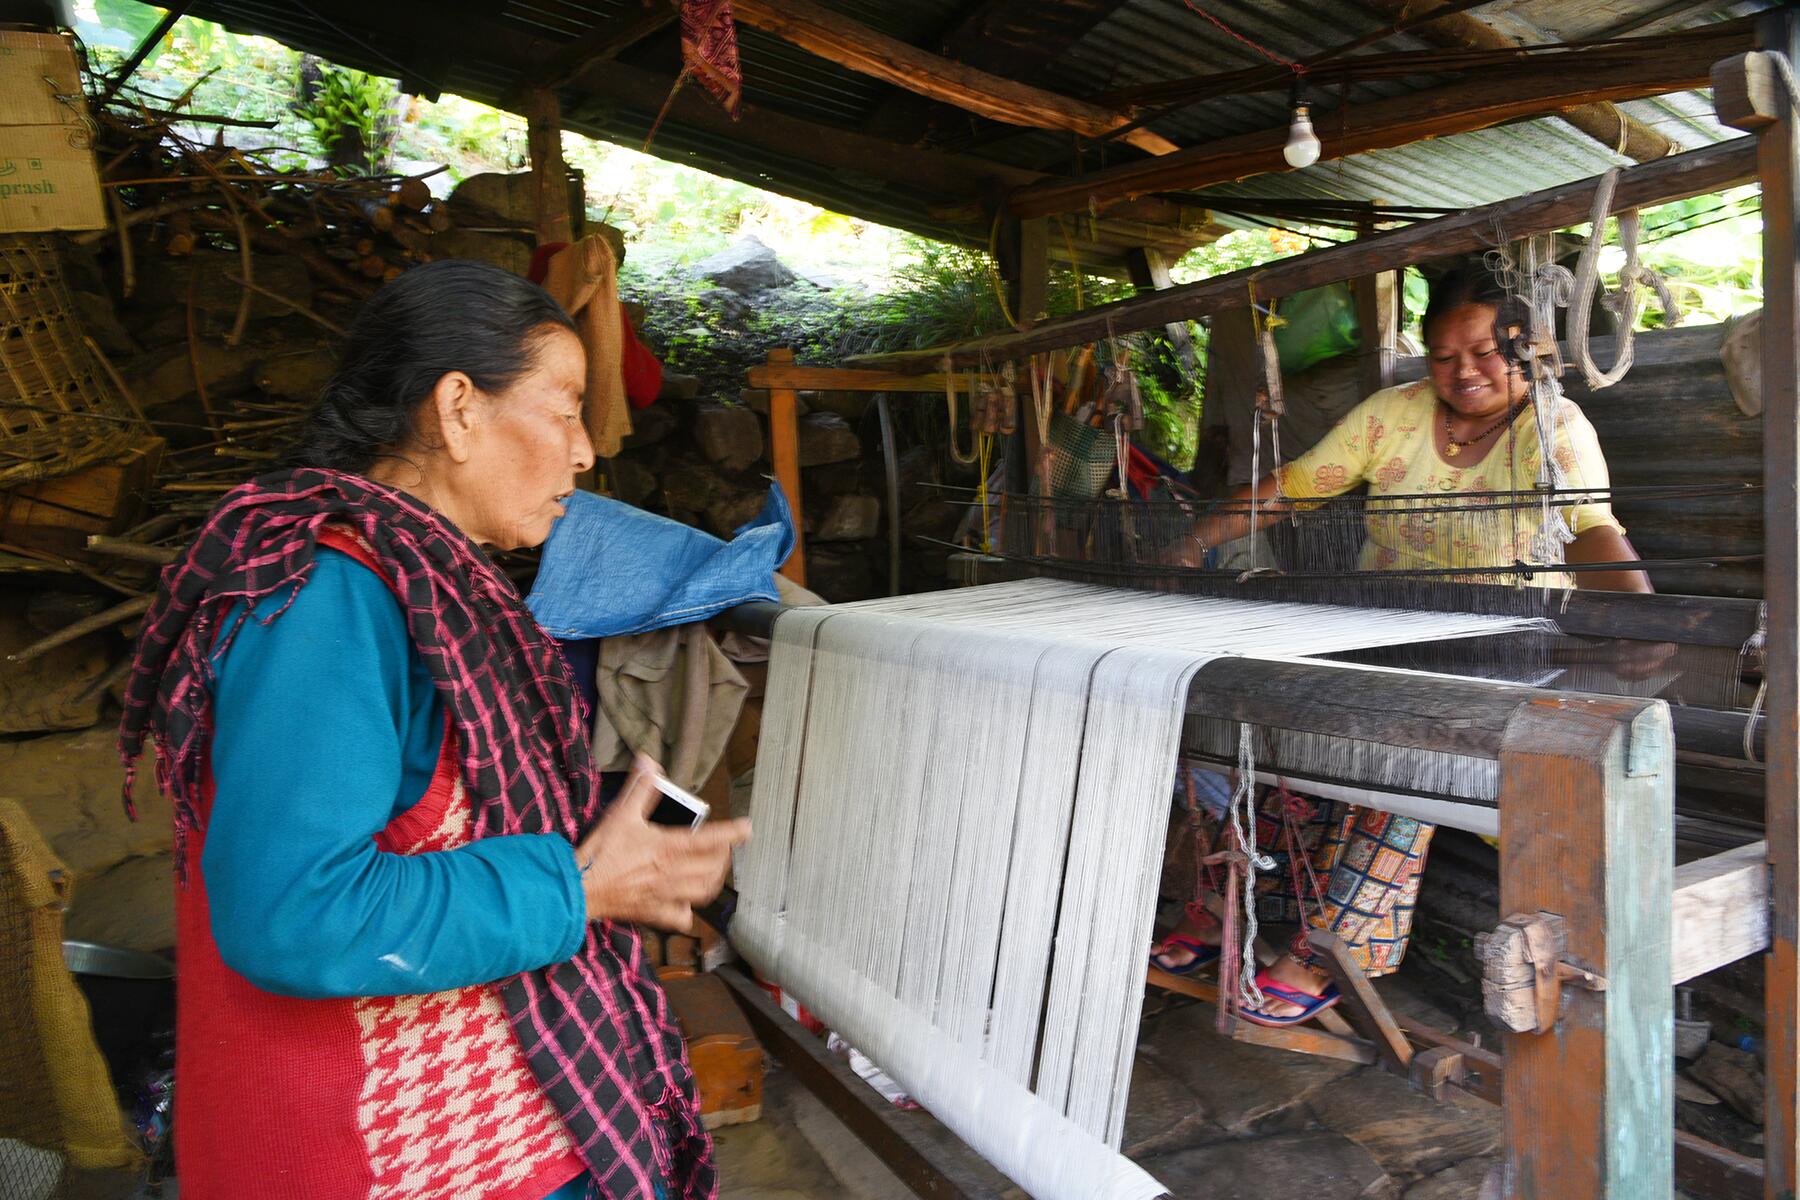 Traditional Hand-Weaving in Villages of Indonesia - Indonesia Travel